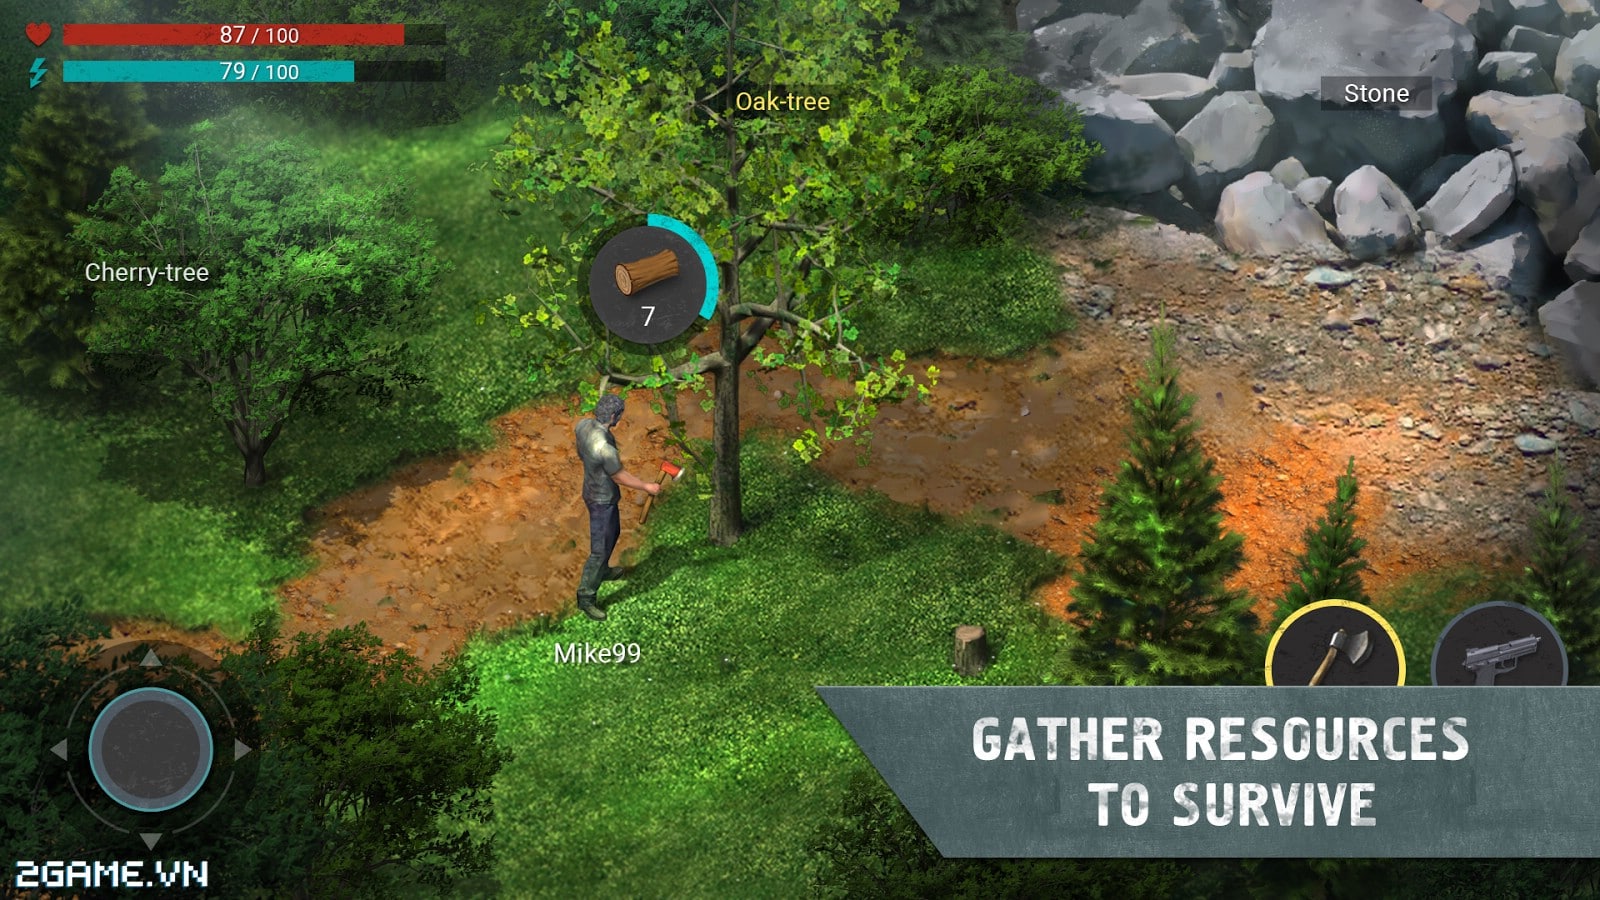 2game-Last-Day-on-Earth-Survival-mobile-2.jpg (1600×900)